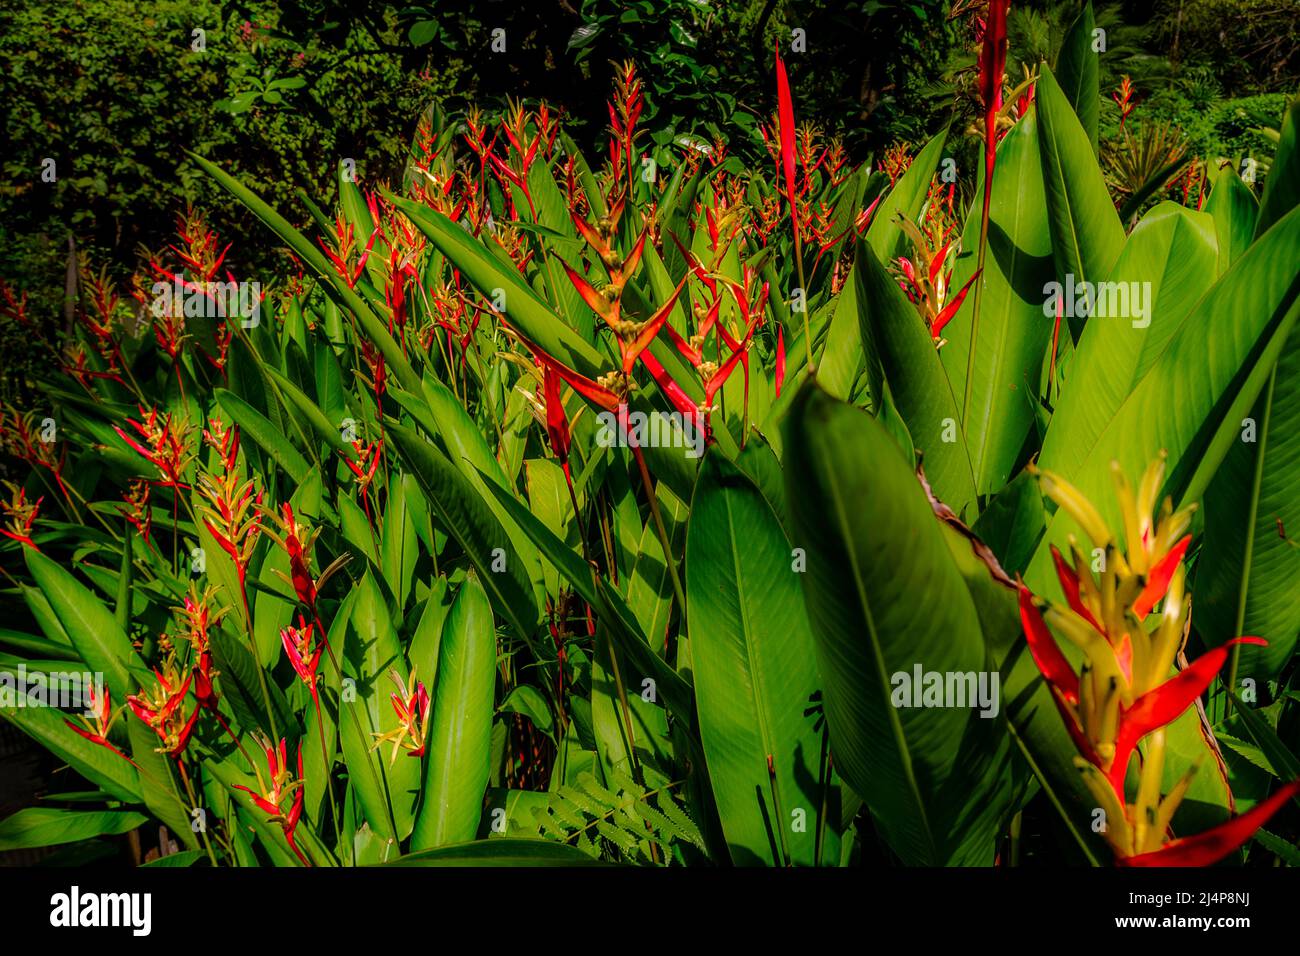 Bright red & green make this Bird of Paradise flowers a high contrast color image. Growing in a garden in Bangkok. Stock Photo